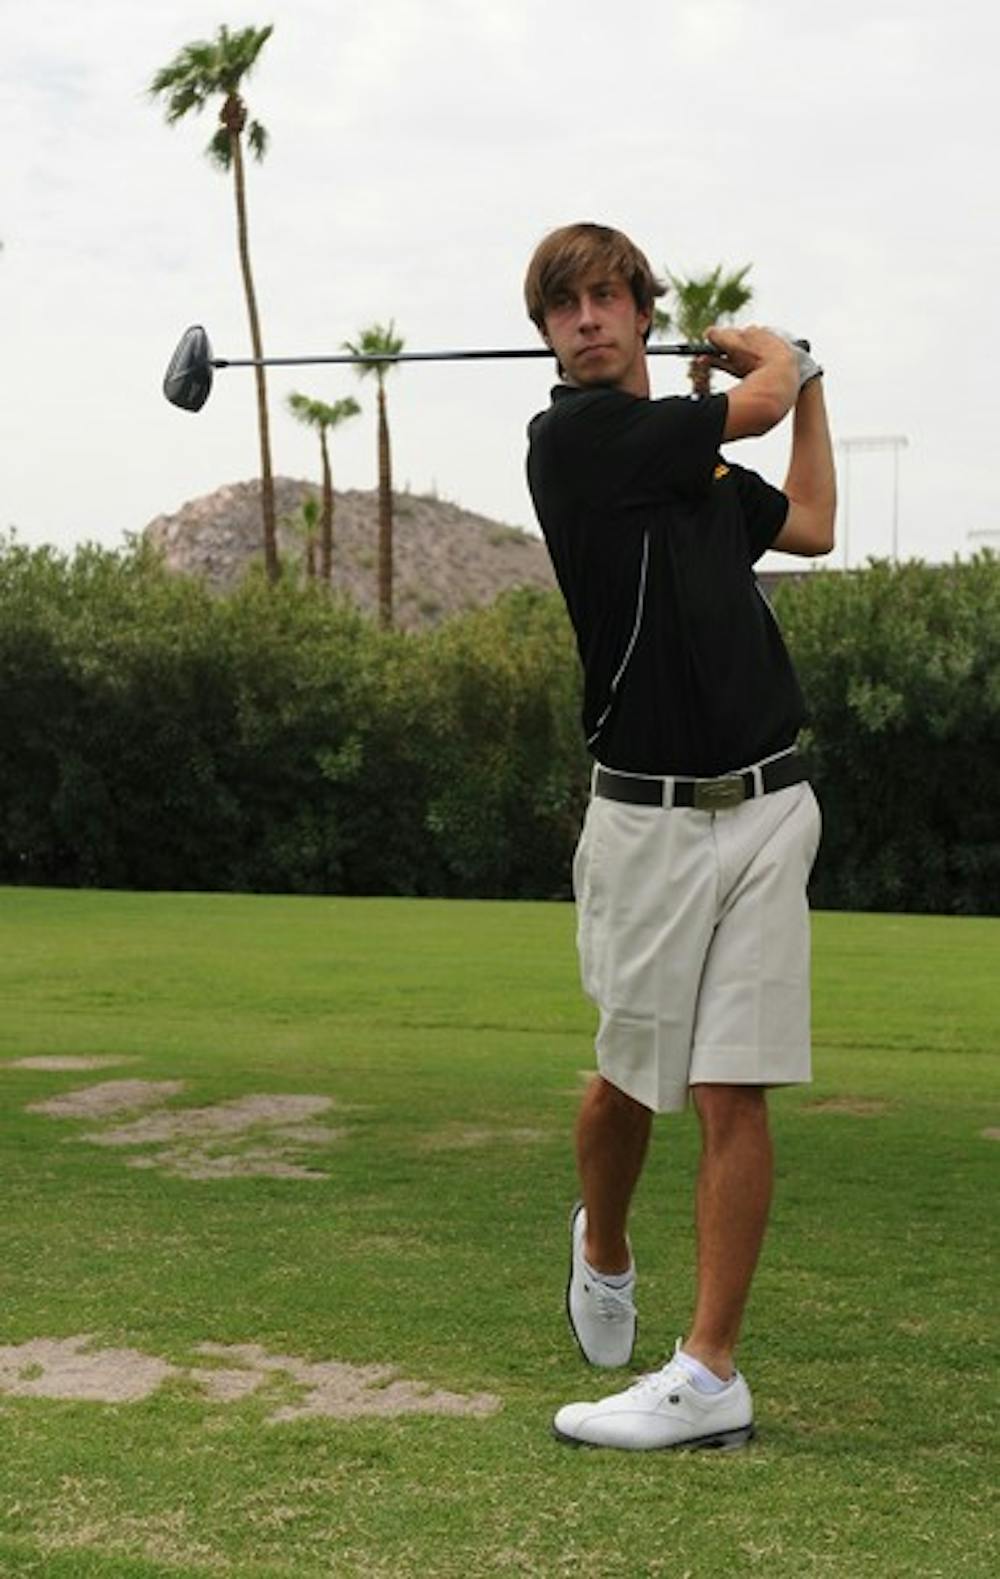 STRONG OPENER: ASU freshman Stan Gautier takes a swing at the Karsten driving range during media day on Sept. 2. Gautier’s first-round 68 helped the Sun Devils to an eighth-place finish at the Tucker Invitational. (Courtesy of Maggie Emmons)